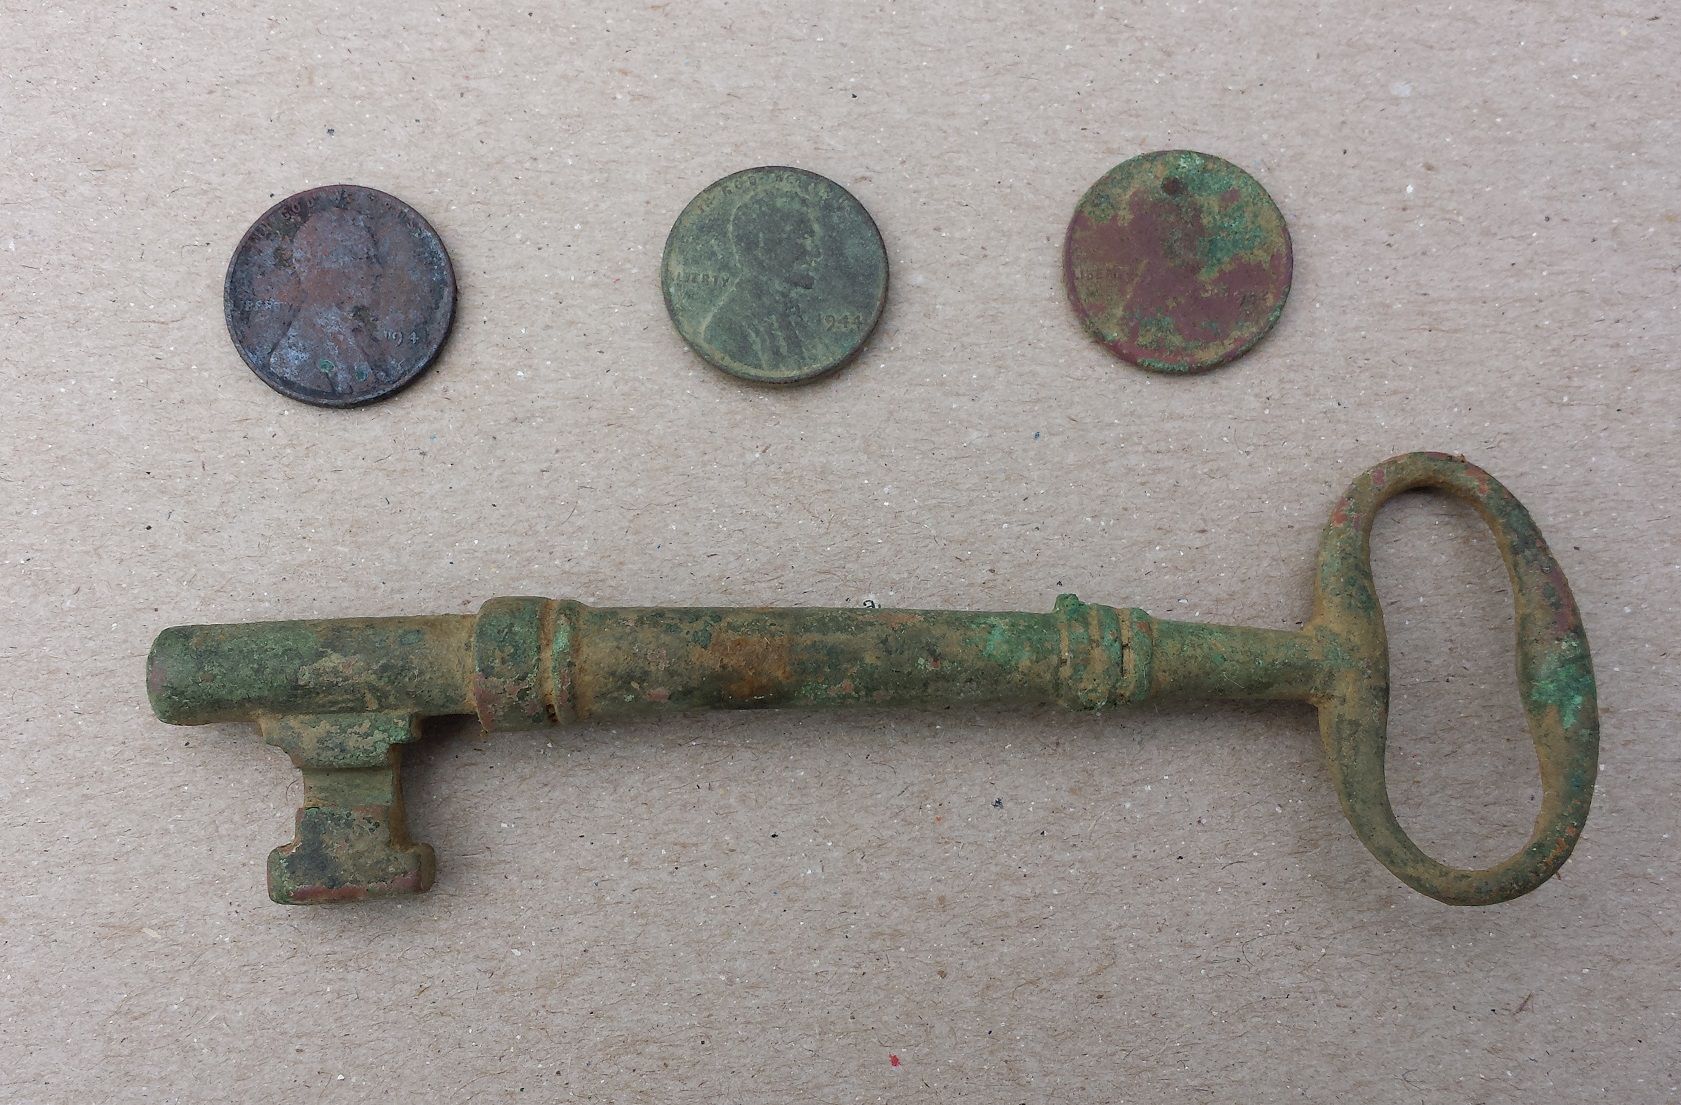 20151101 My first skeleton key with 1941, 1944 and 1952d wheat pennies. Found on an empty lot that used to have houses in downtown Jackson with the F4